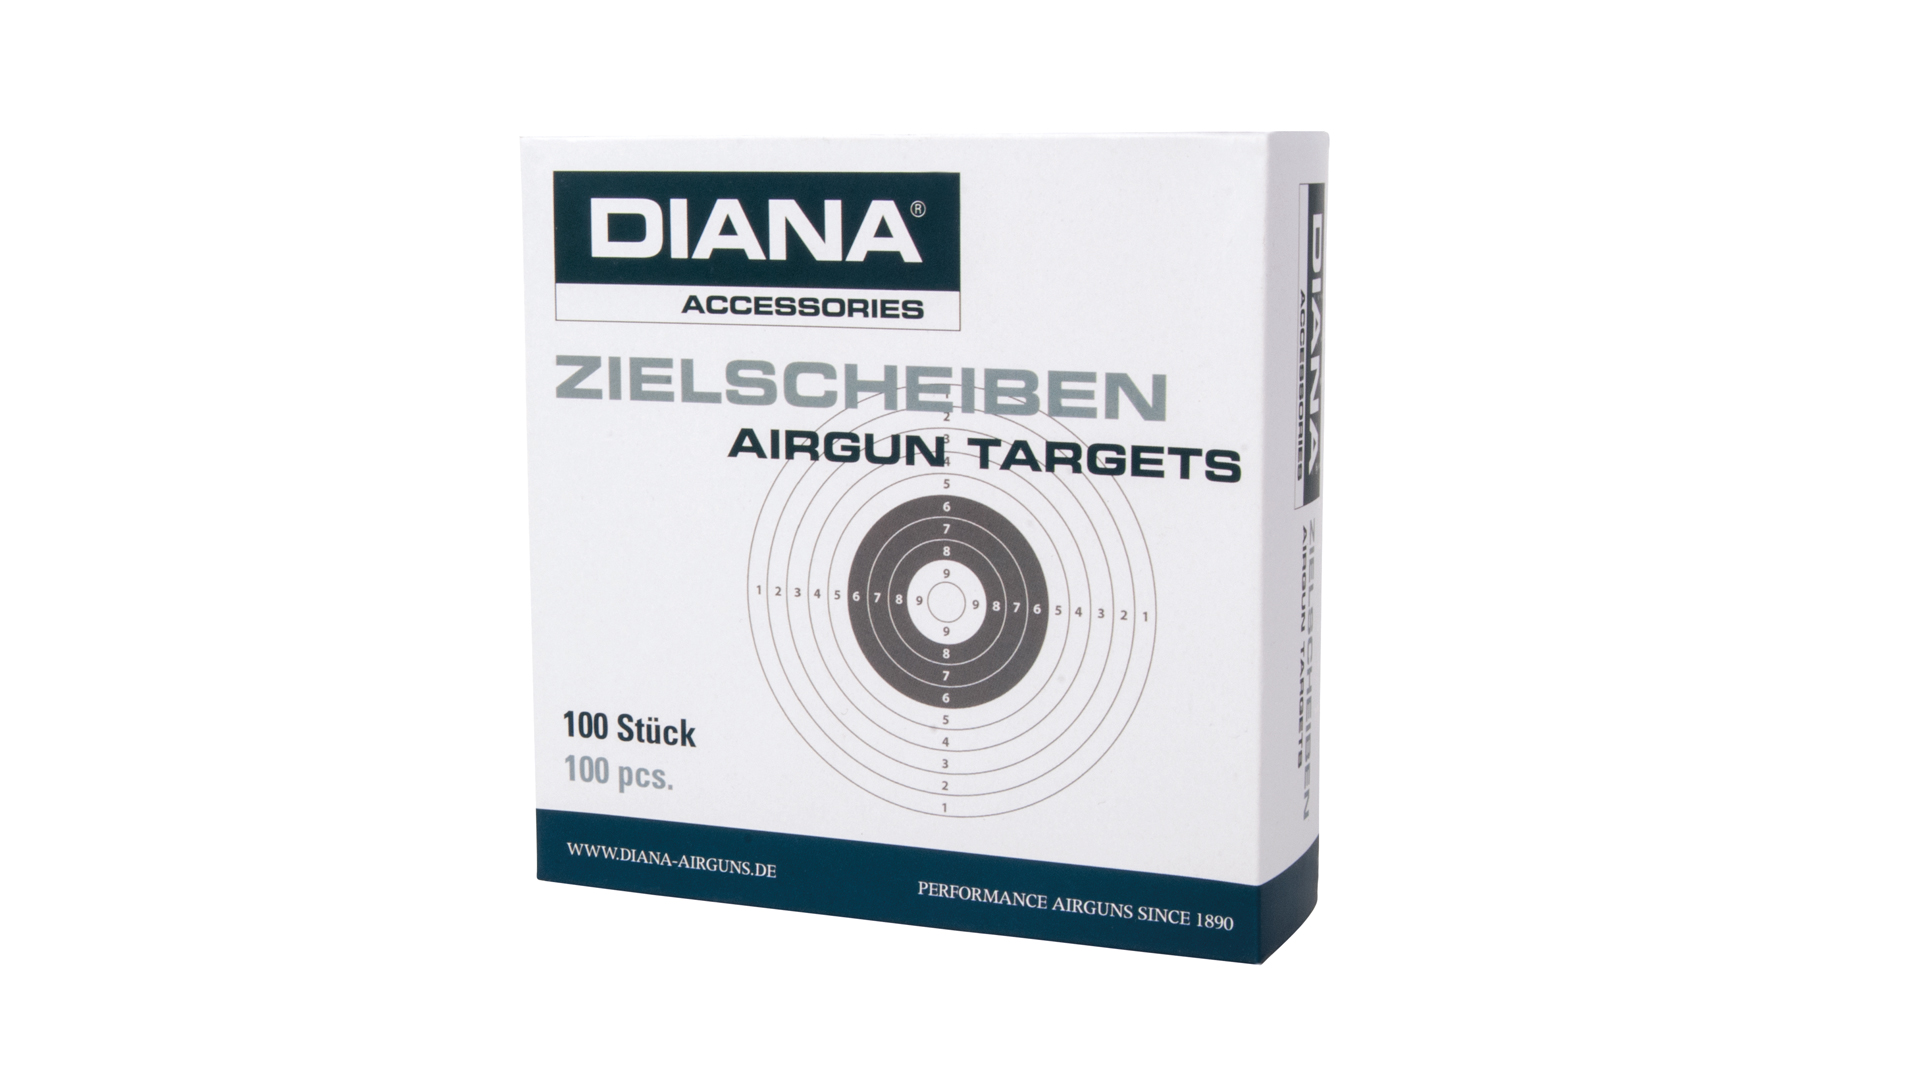 DIANA paper targets